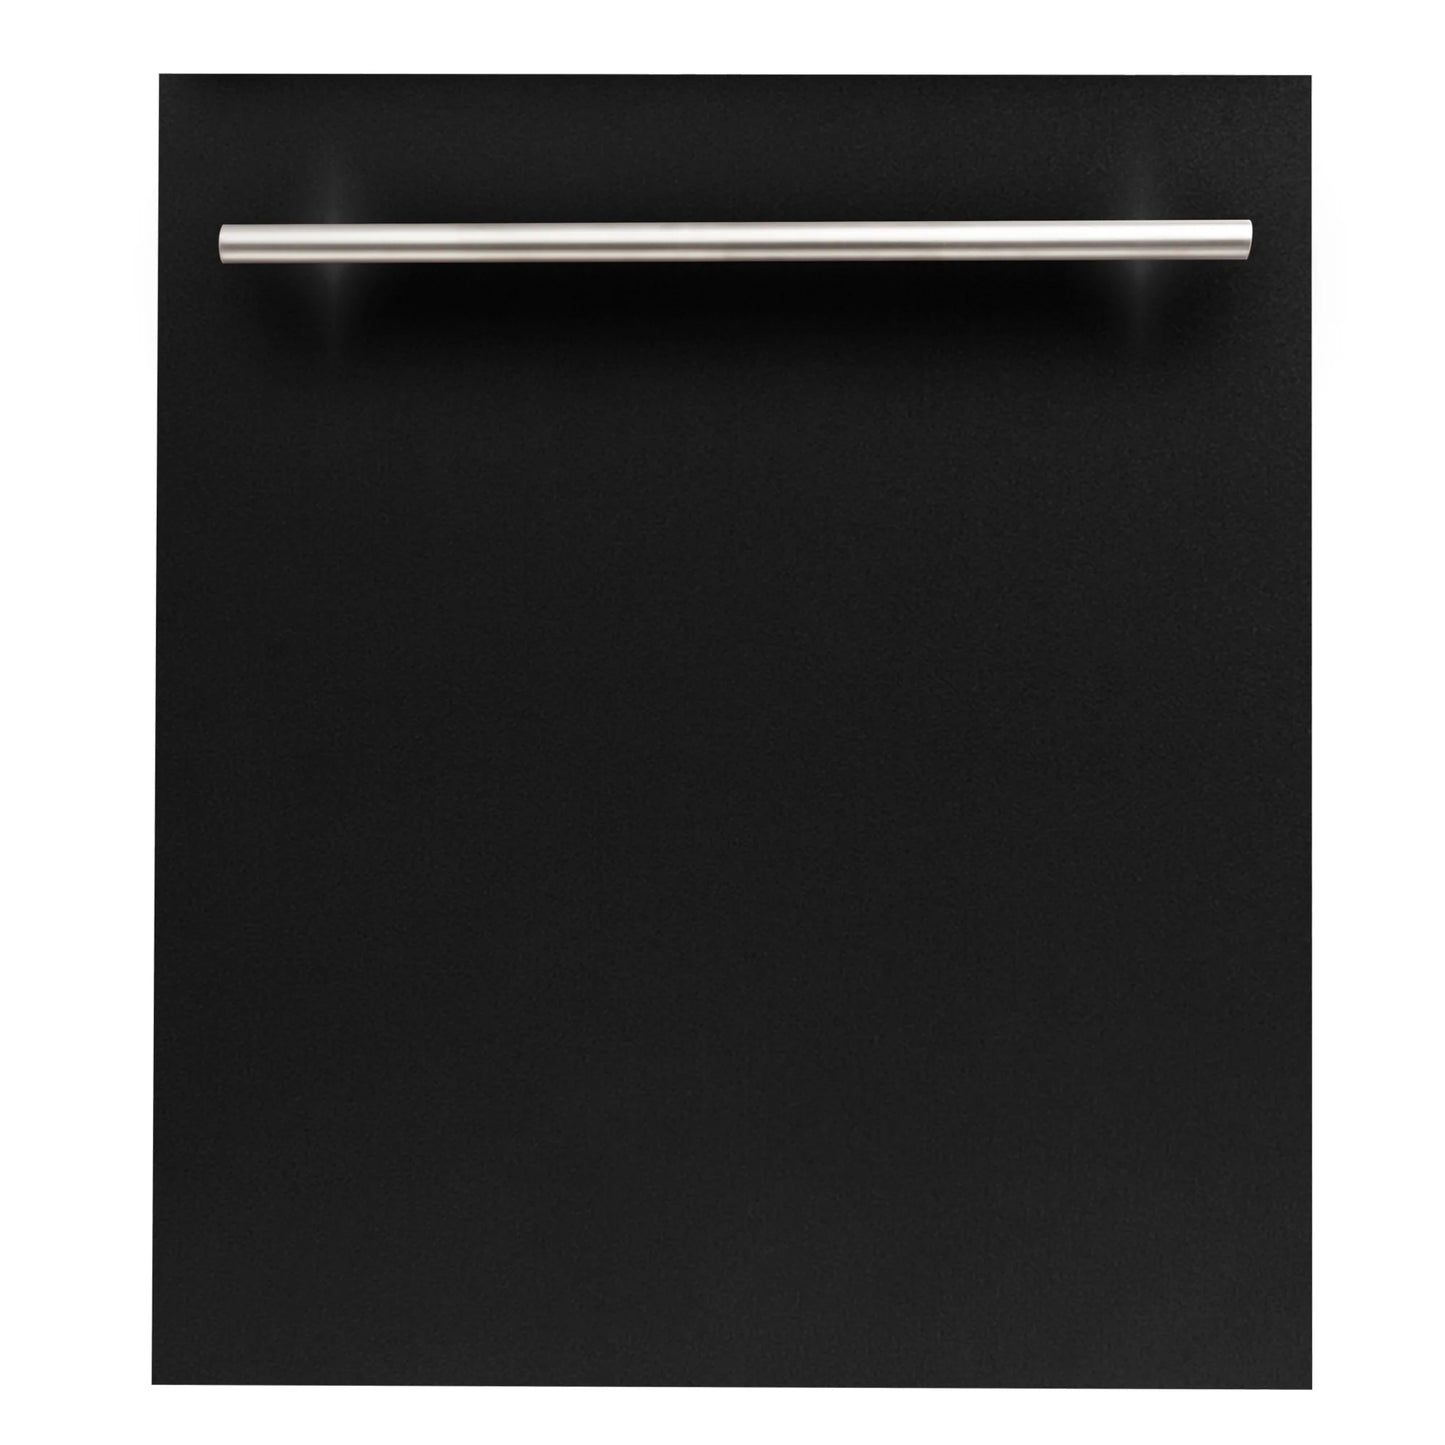 ZLINE 24 in. Compact Top Control Dishwasher with Black Matte Panel and Modern Handle (DW-BLM-H-24)